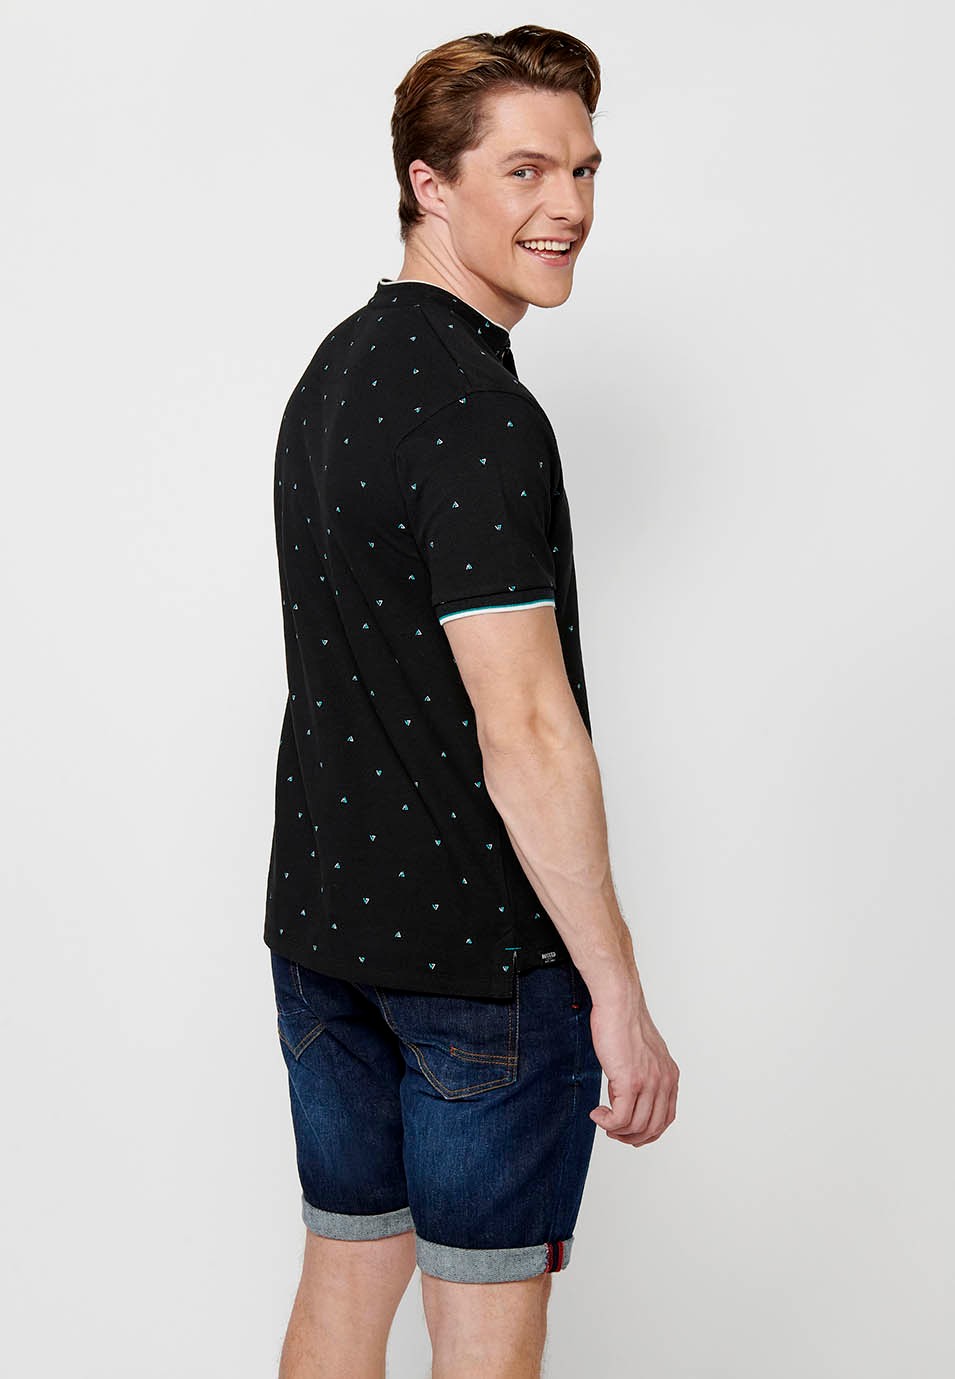 Short-sleeved Cotton Polo with Round Neck with buttoned opening and Finished with Side Cuts in Black for Men 1